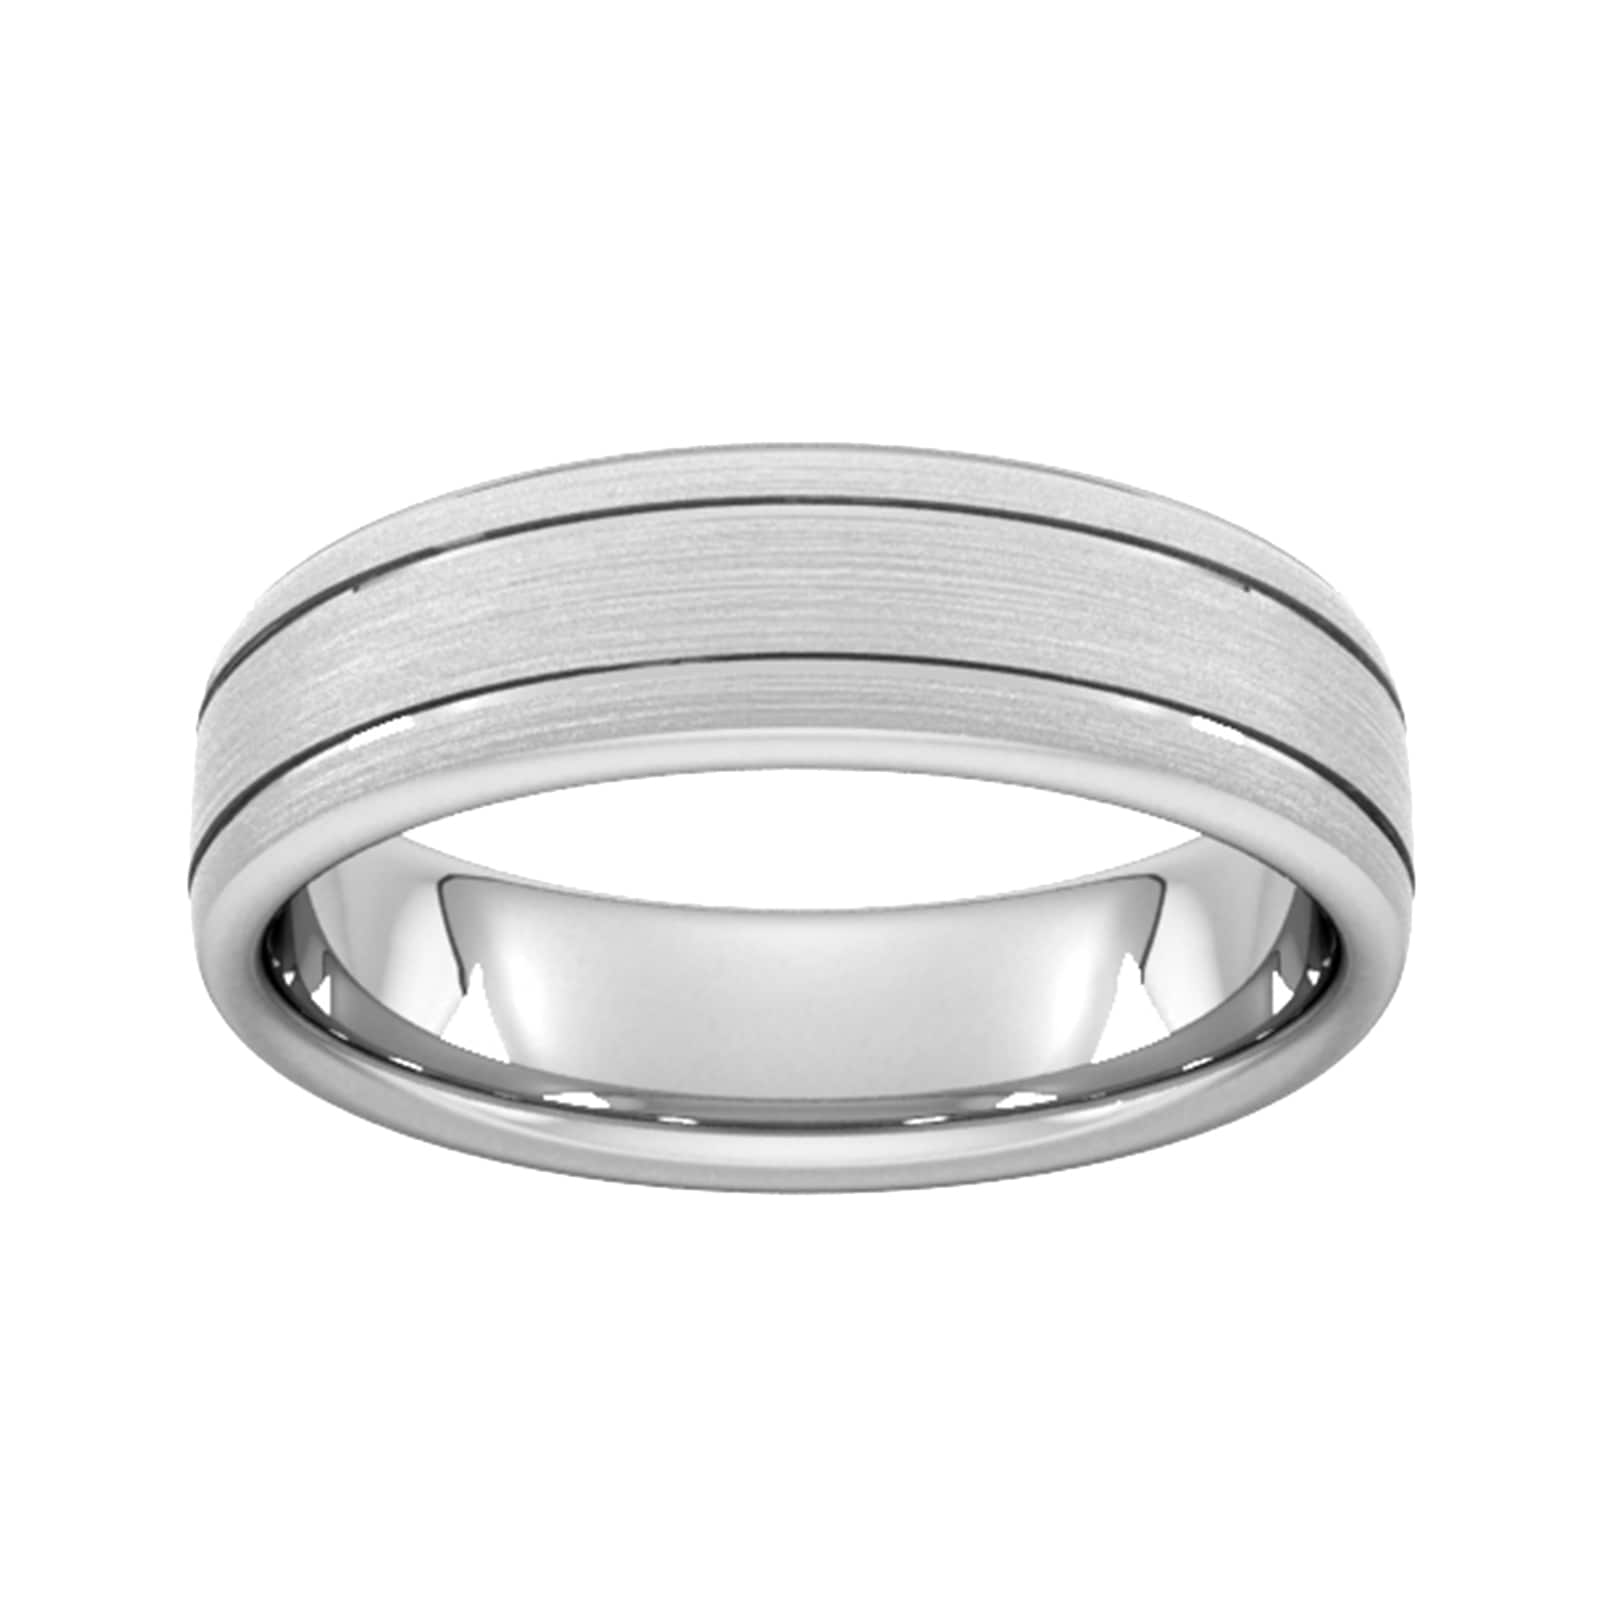 6mm Slight Court Extra Heavy Matt Finish With Double Grooves Wedding Ring In 18 Carat White Gold - Ring Size V